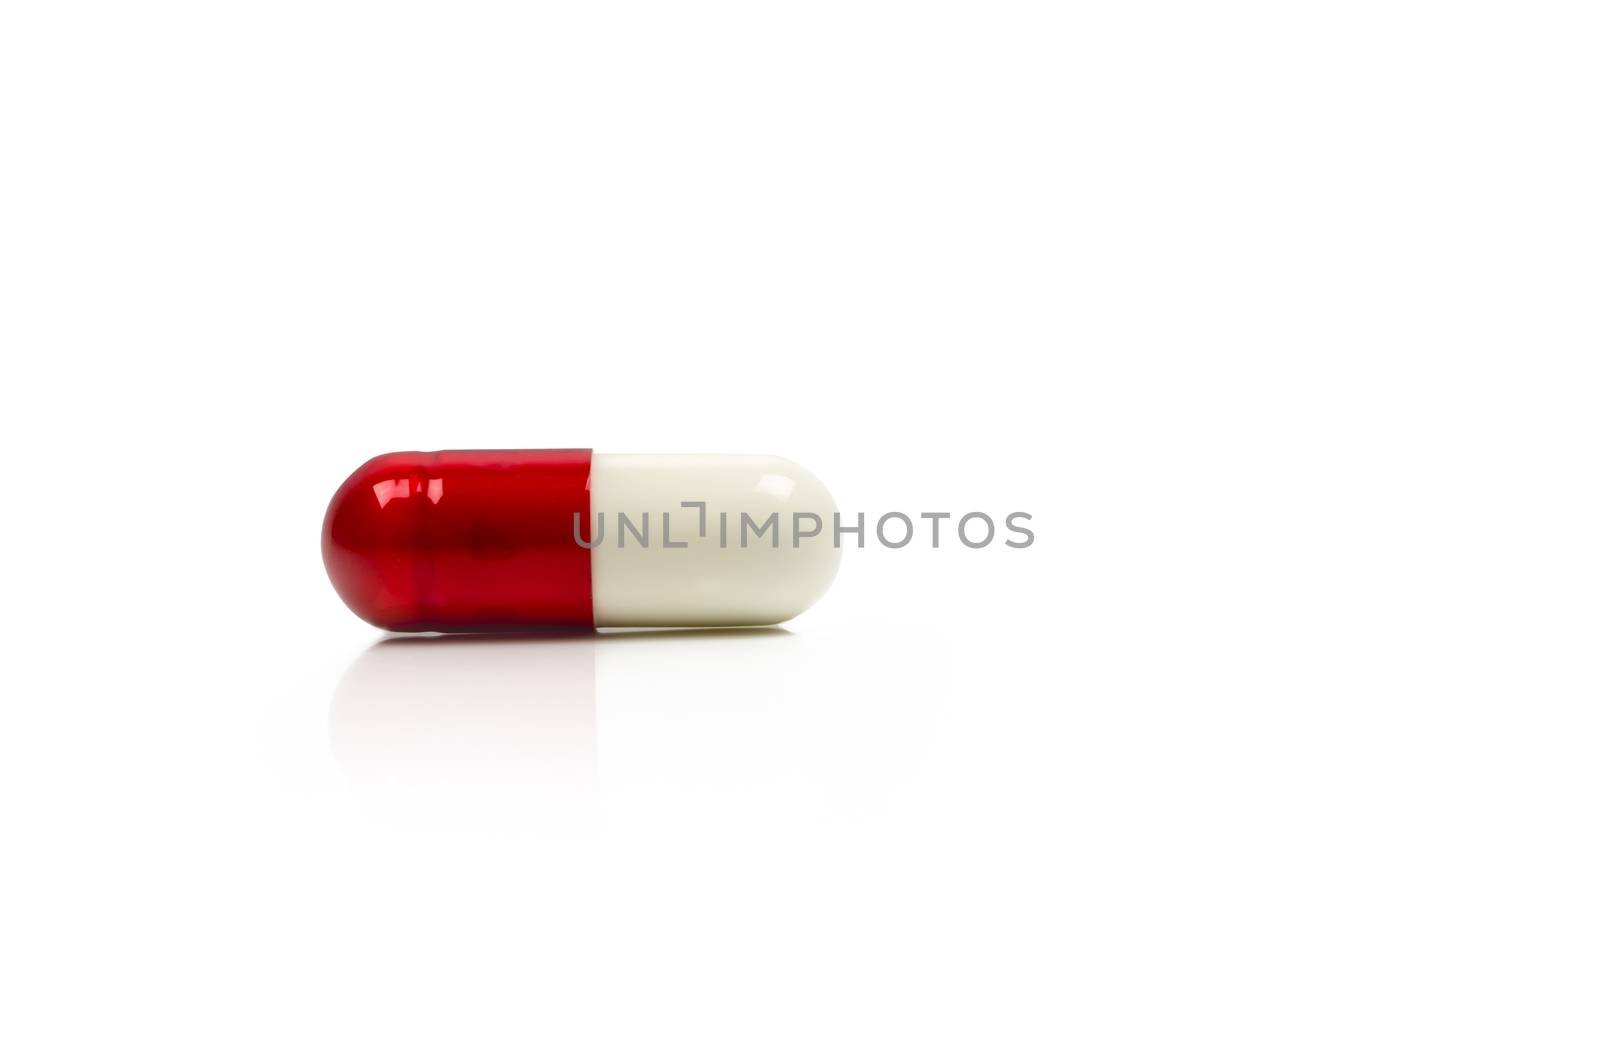 Red, white antibiotics capsule pill isolated on white background with copy space. Drug resistance concept. Antibiotics drug use with reasonable and global healthcare concept. Pharmaceutical industry. Pharmacy background.